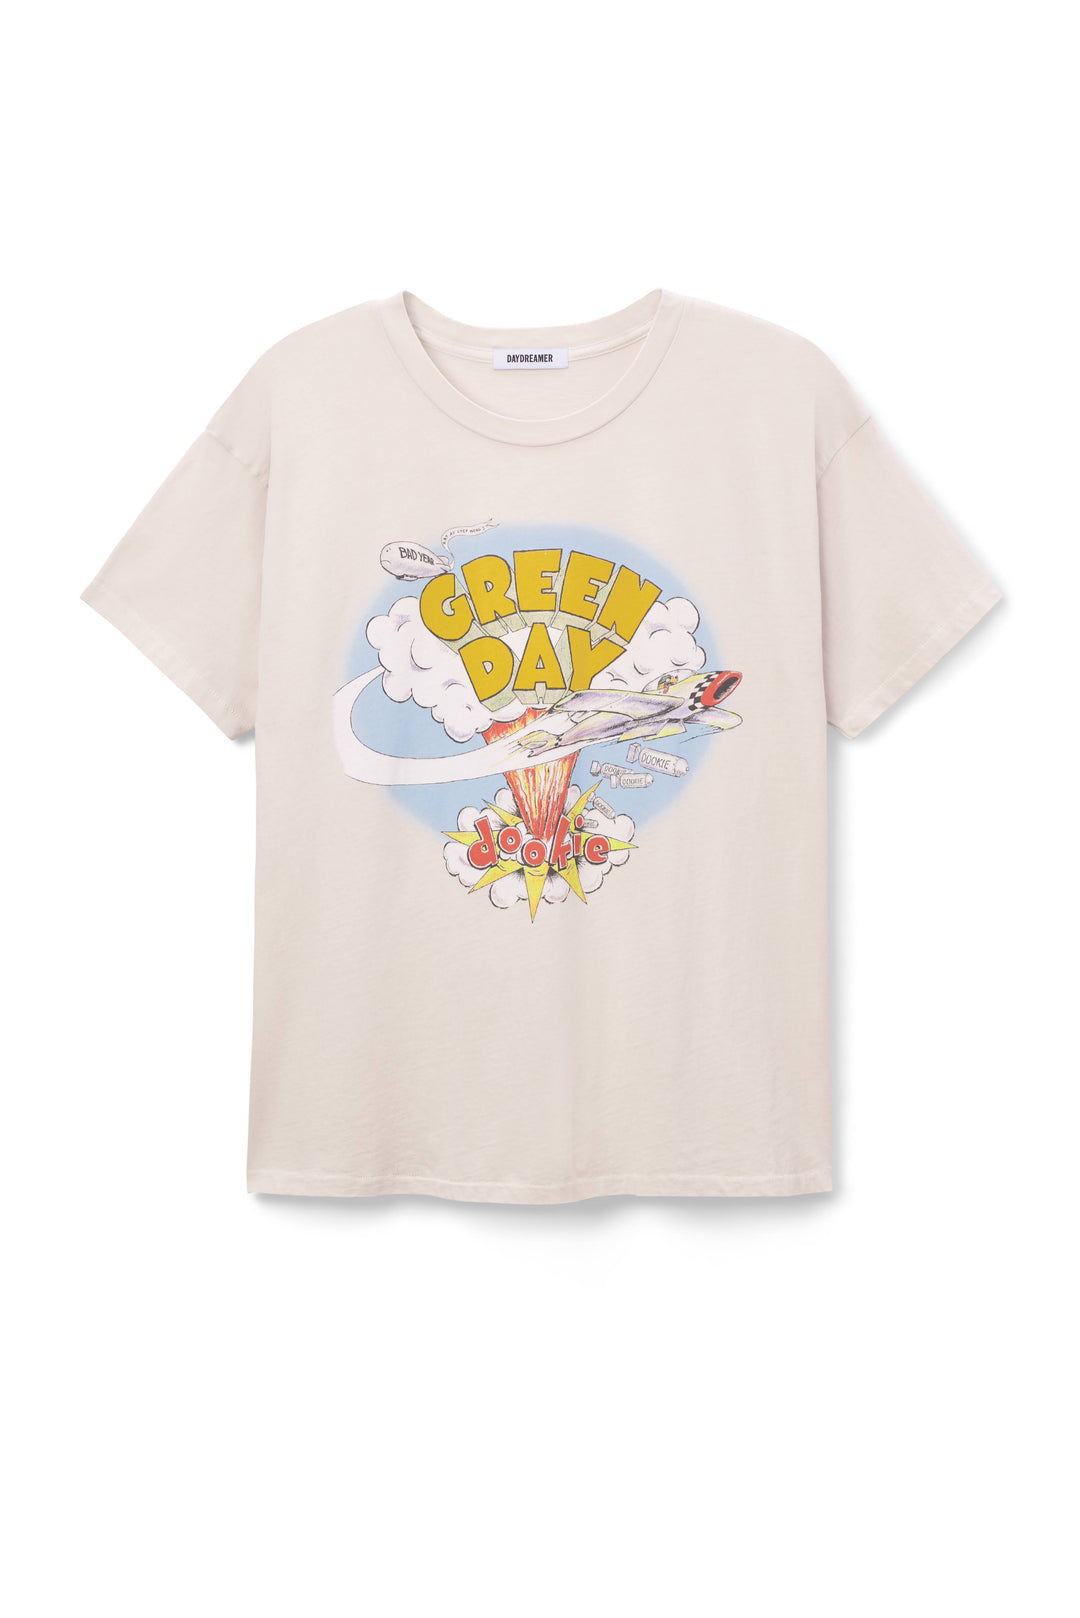 GREEN DAY DOOKIE MERCH TEE-DIRTY WHITE - Kingfisher Road - Online Boutique